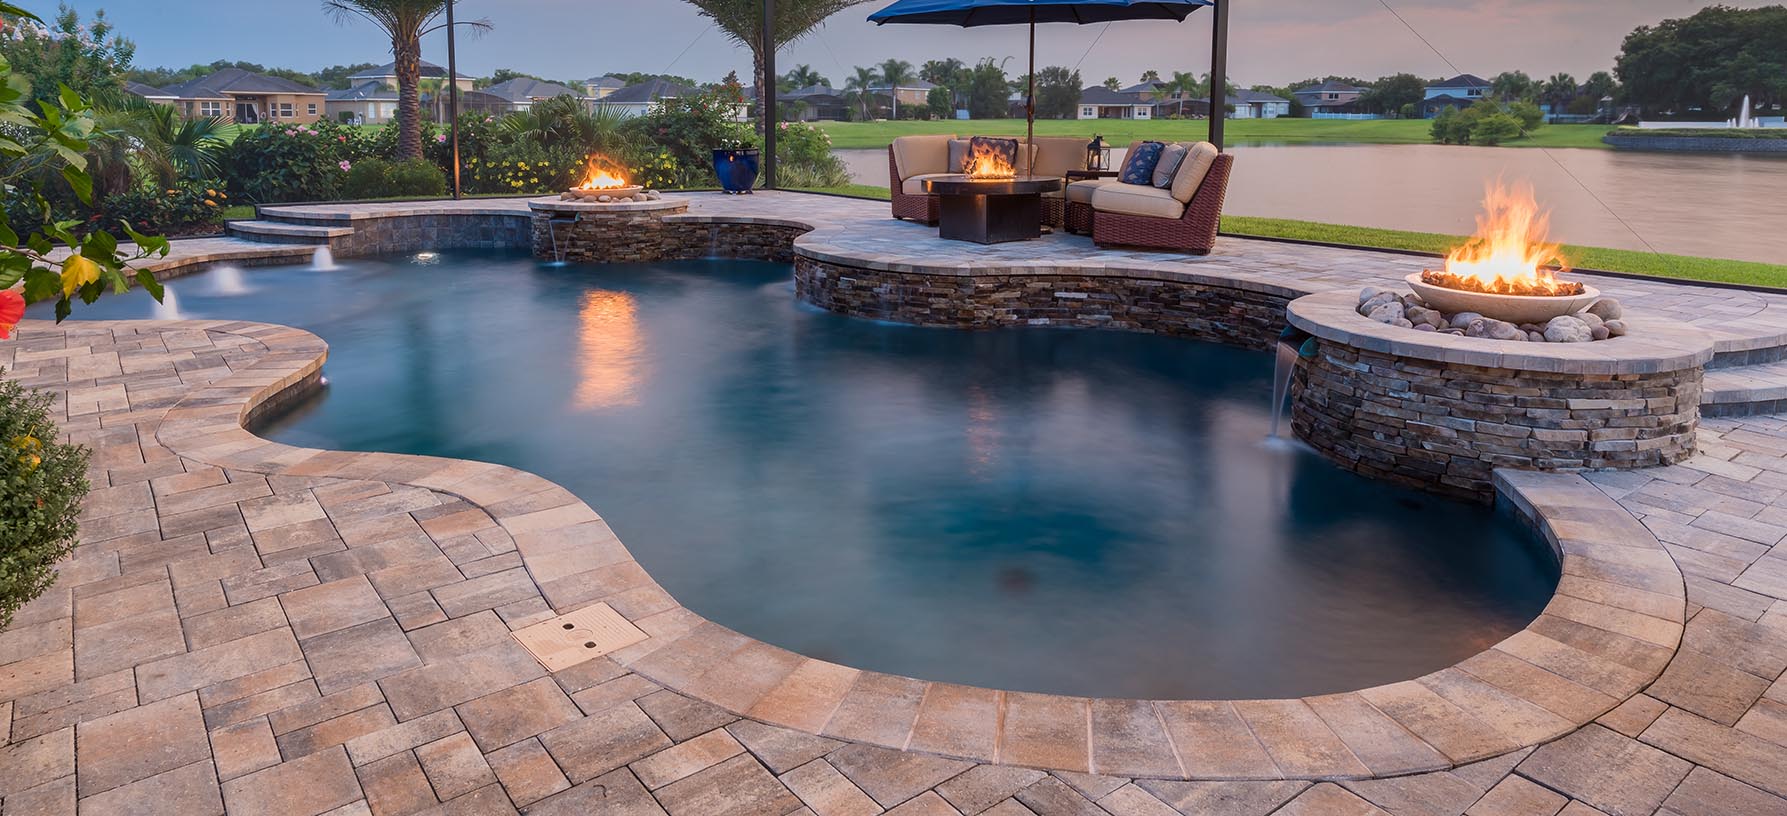 Maintaining your Florida Pool During the Winter Months